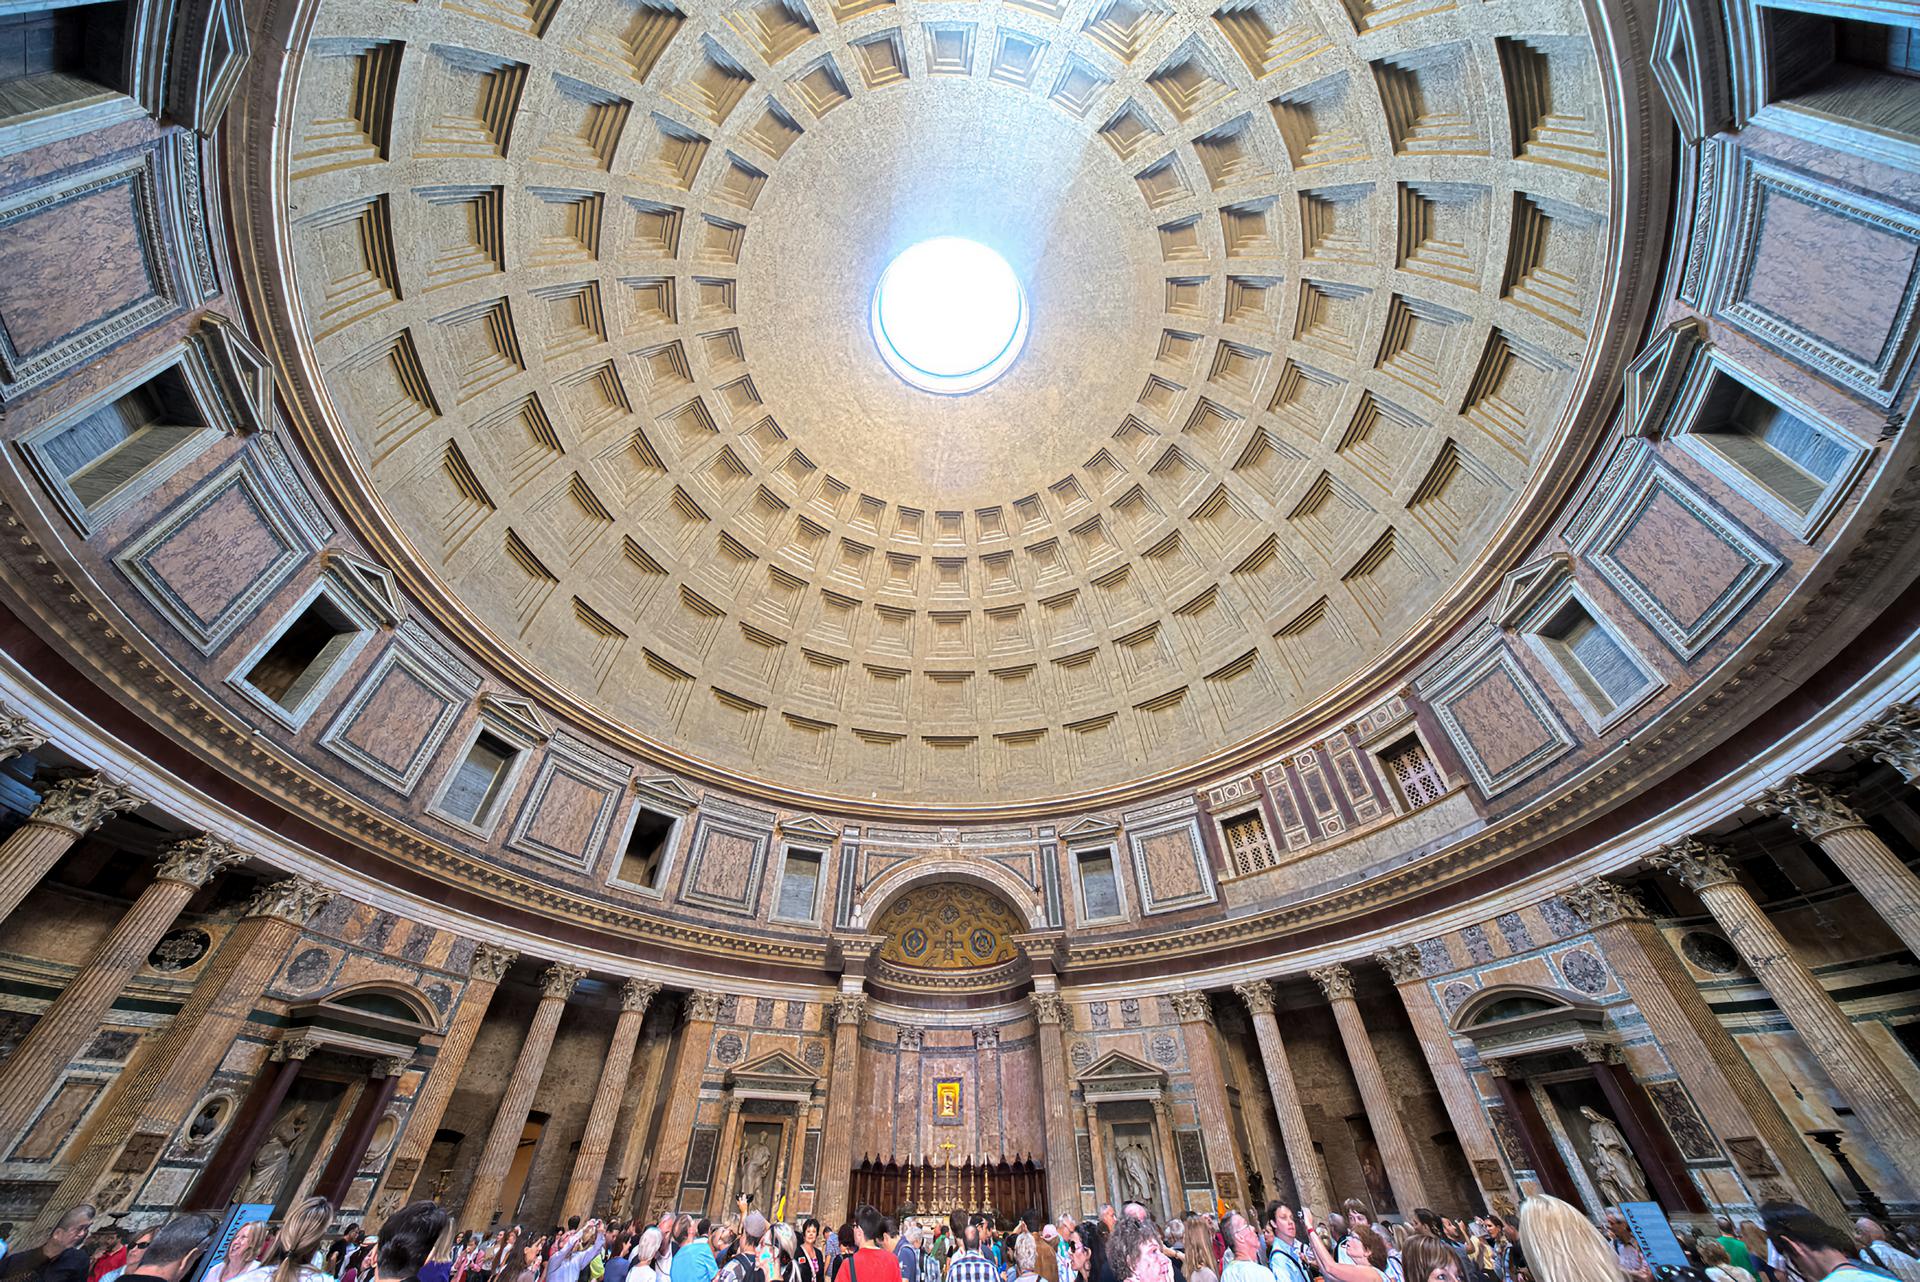 A panoramic image of the whole interior.